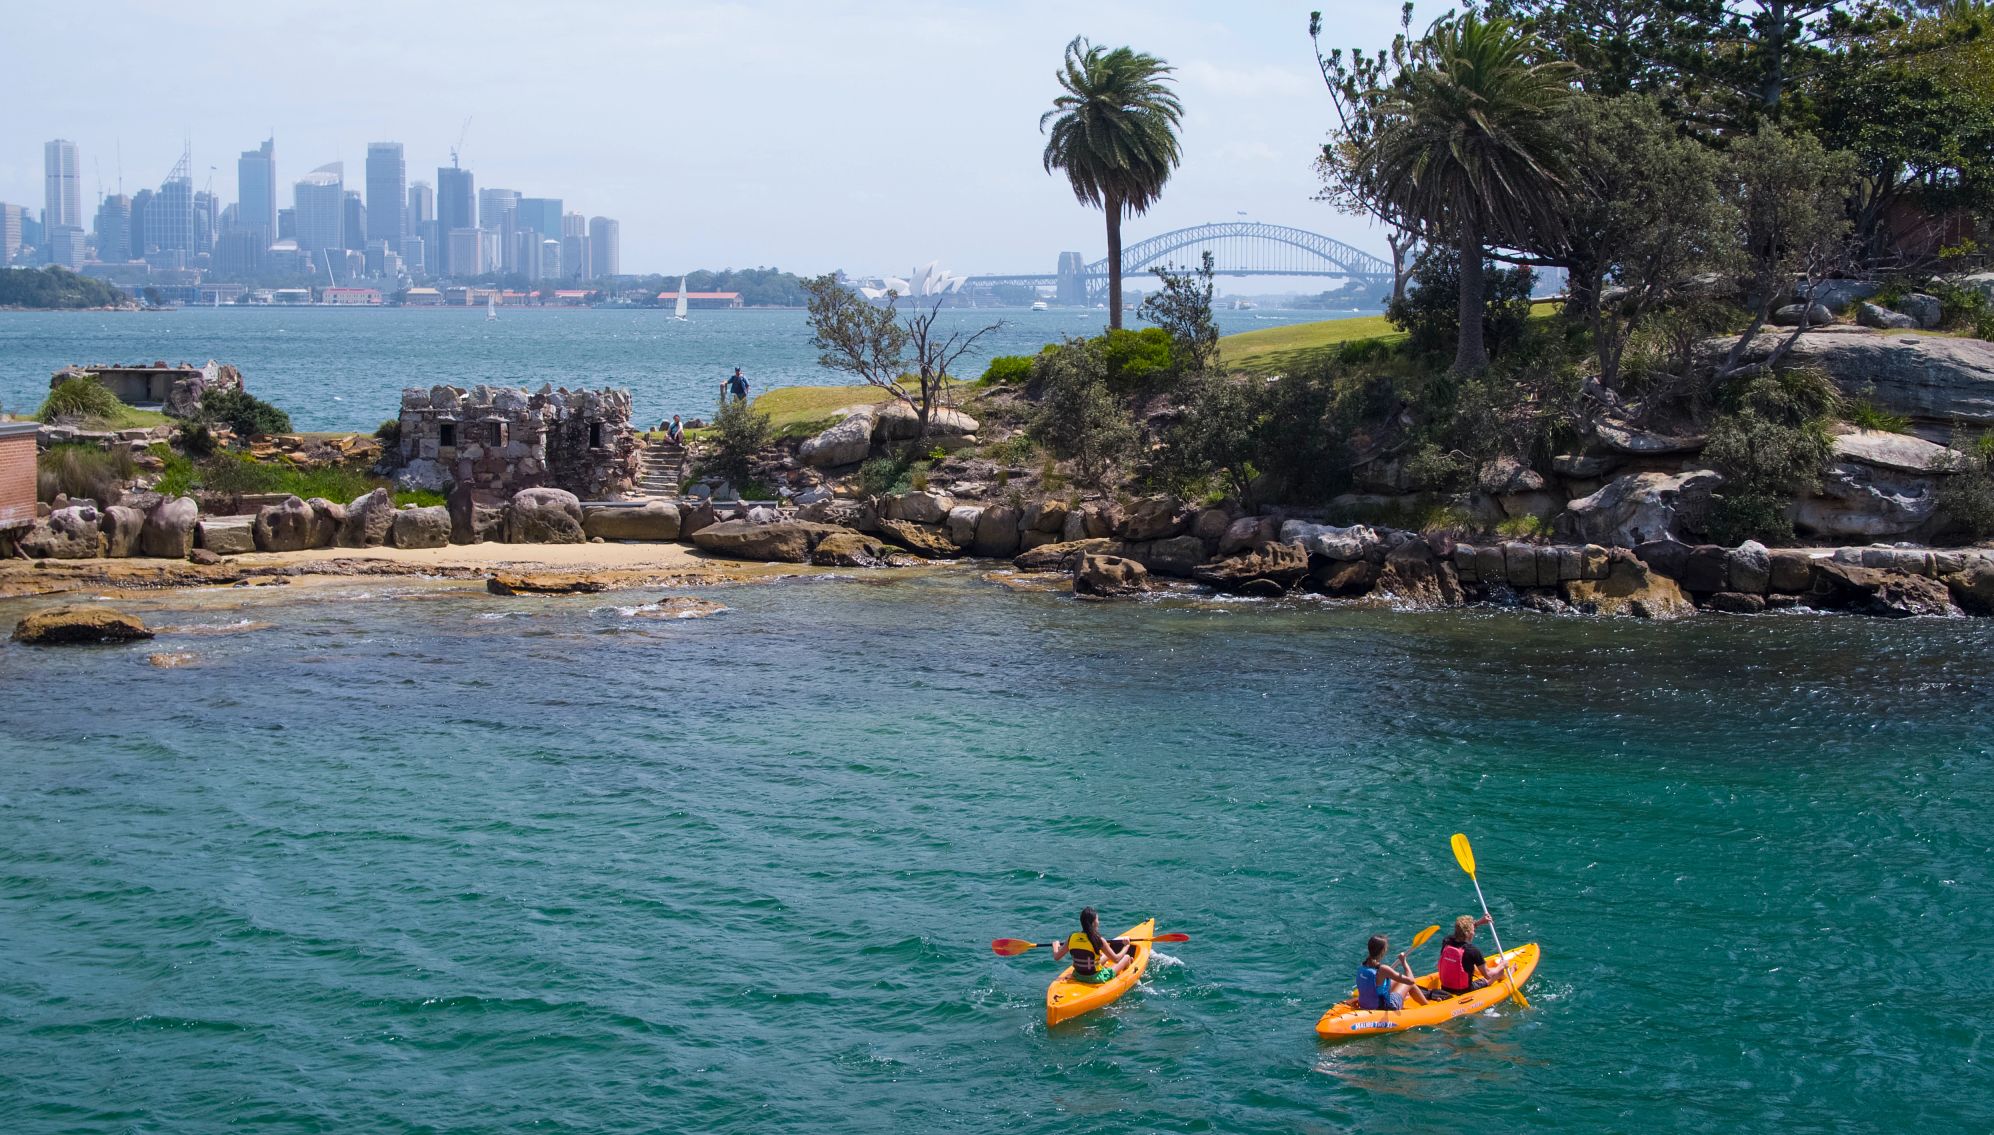 friends enjoying a day of kayaking on sydney harbour.